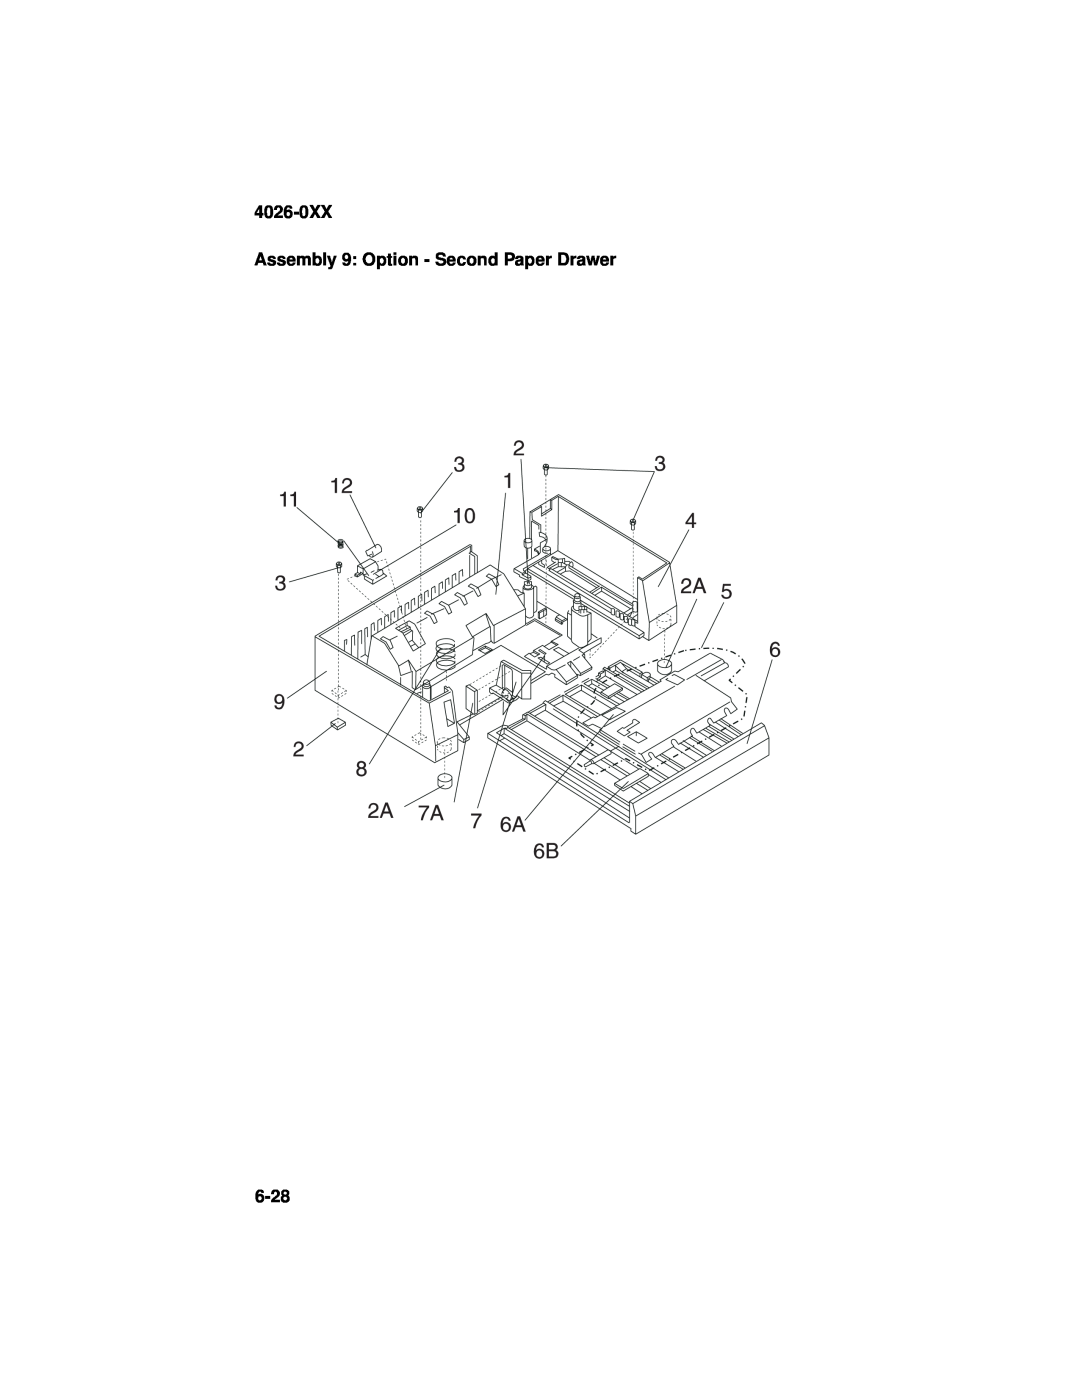 Lexmark manual 4026-0XX Assembly 9: Option - Second Paper Drawer, 6-28 